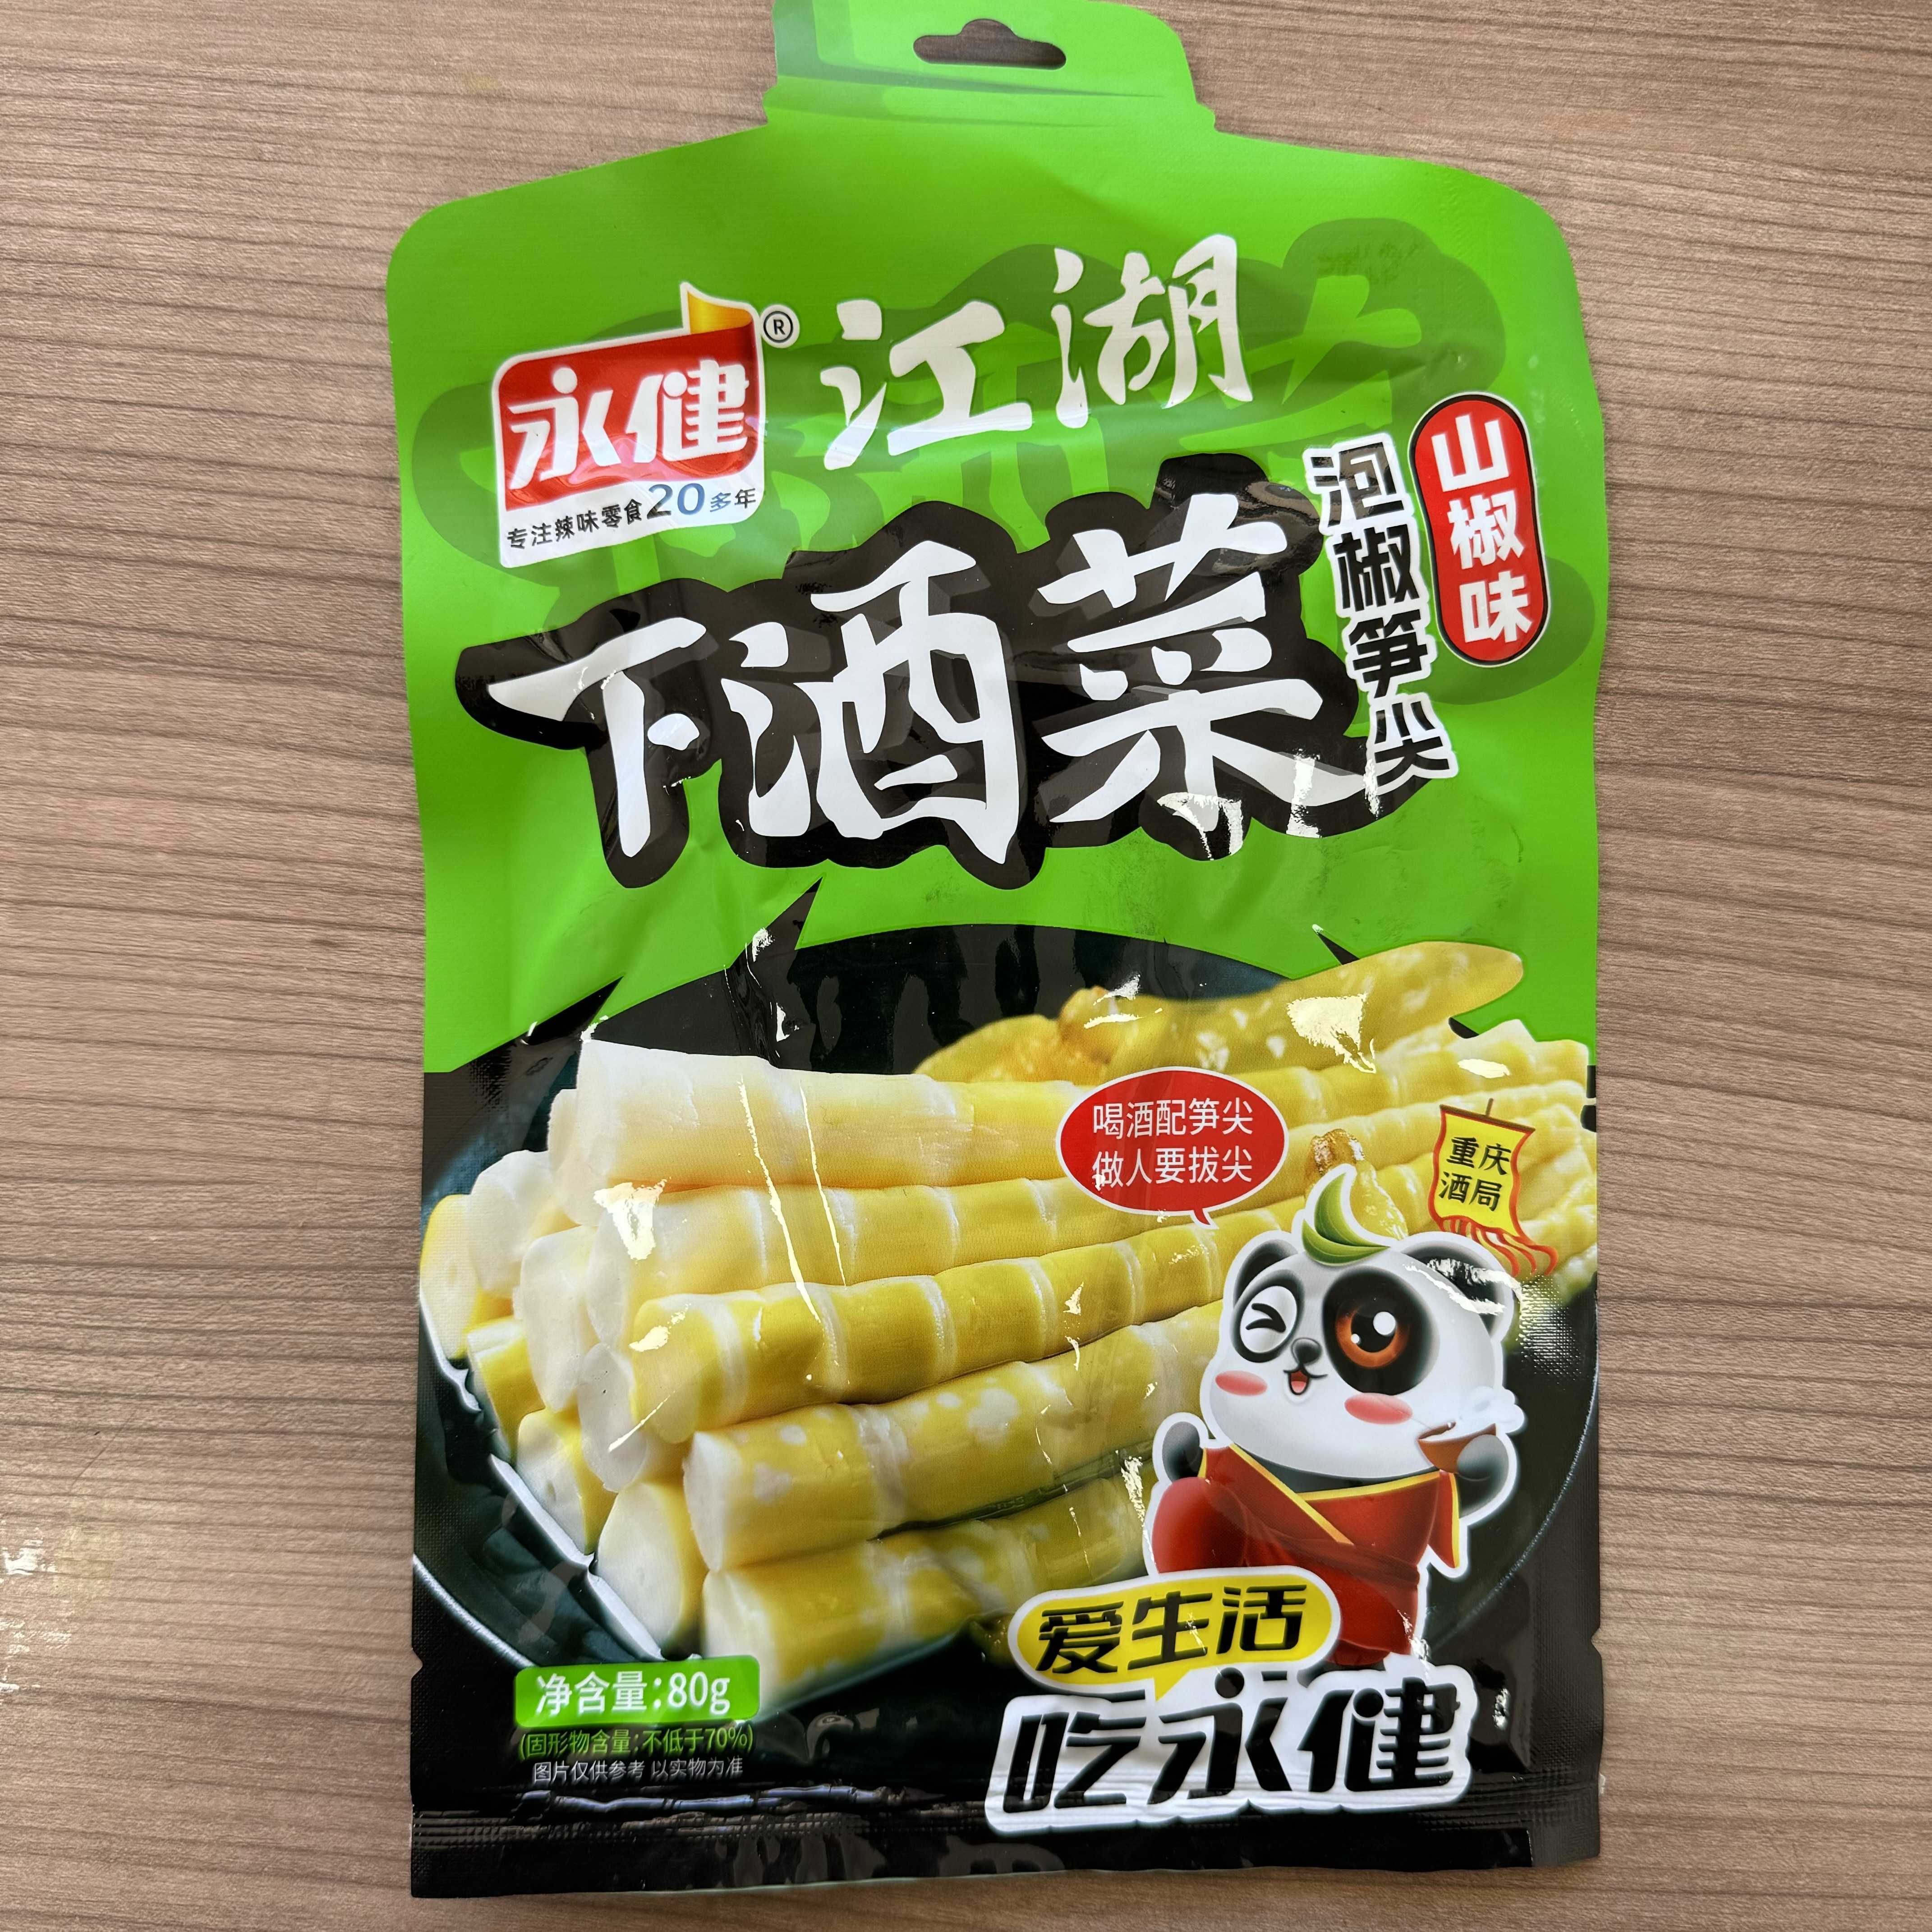 pickled-bamboo-shoot